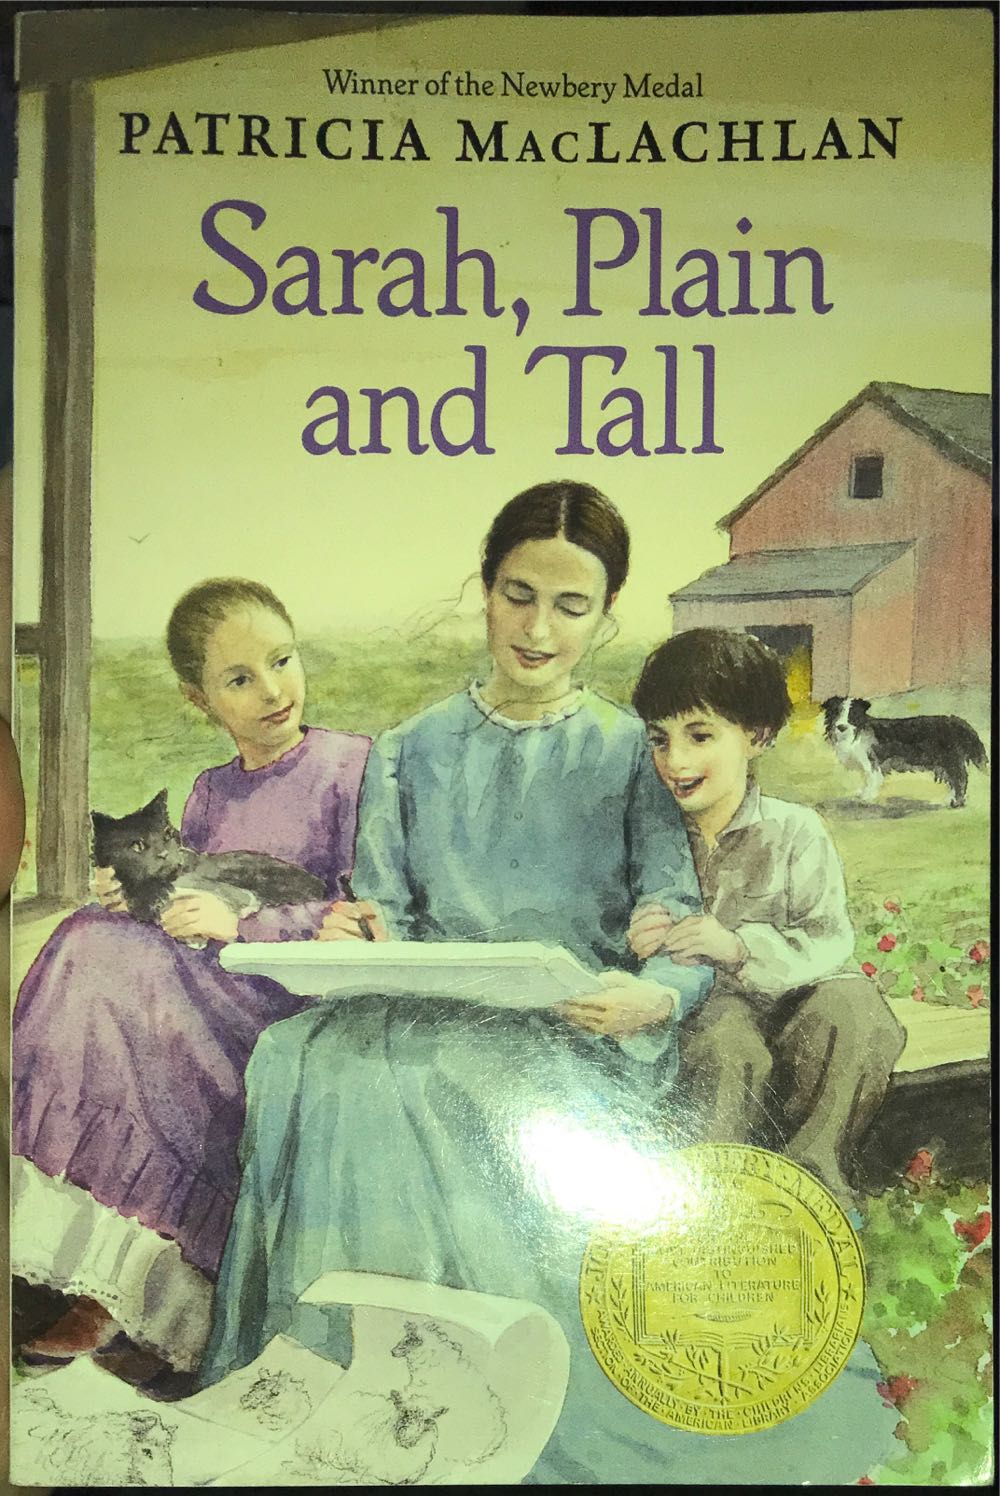 Sarah, Plain and Tall - Patricia MacLachlan (Harper Collins - Paperback) book collectible [Barcode 9780064402057] - Main Image 4